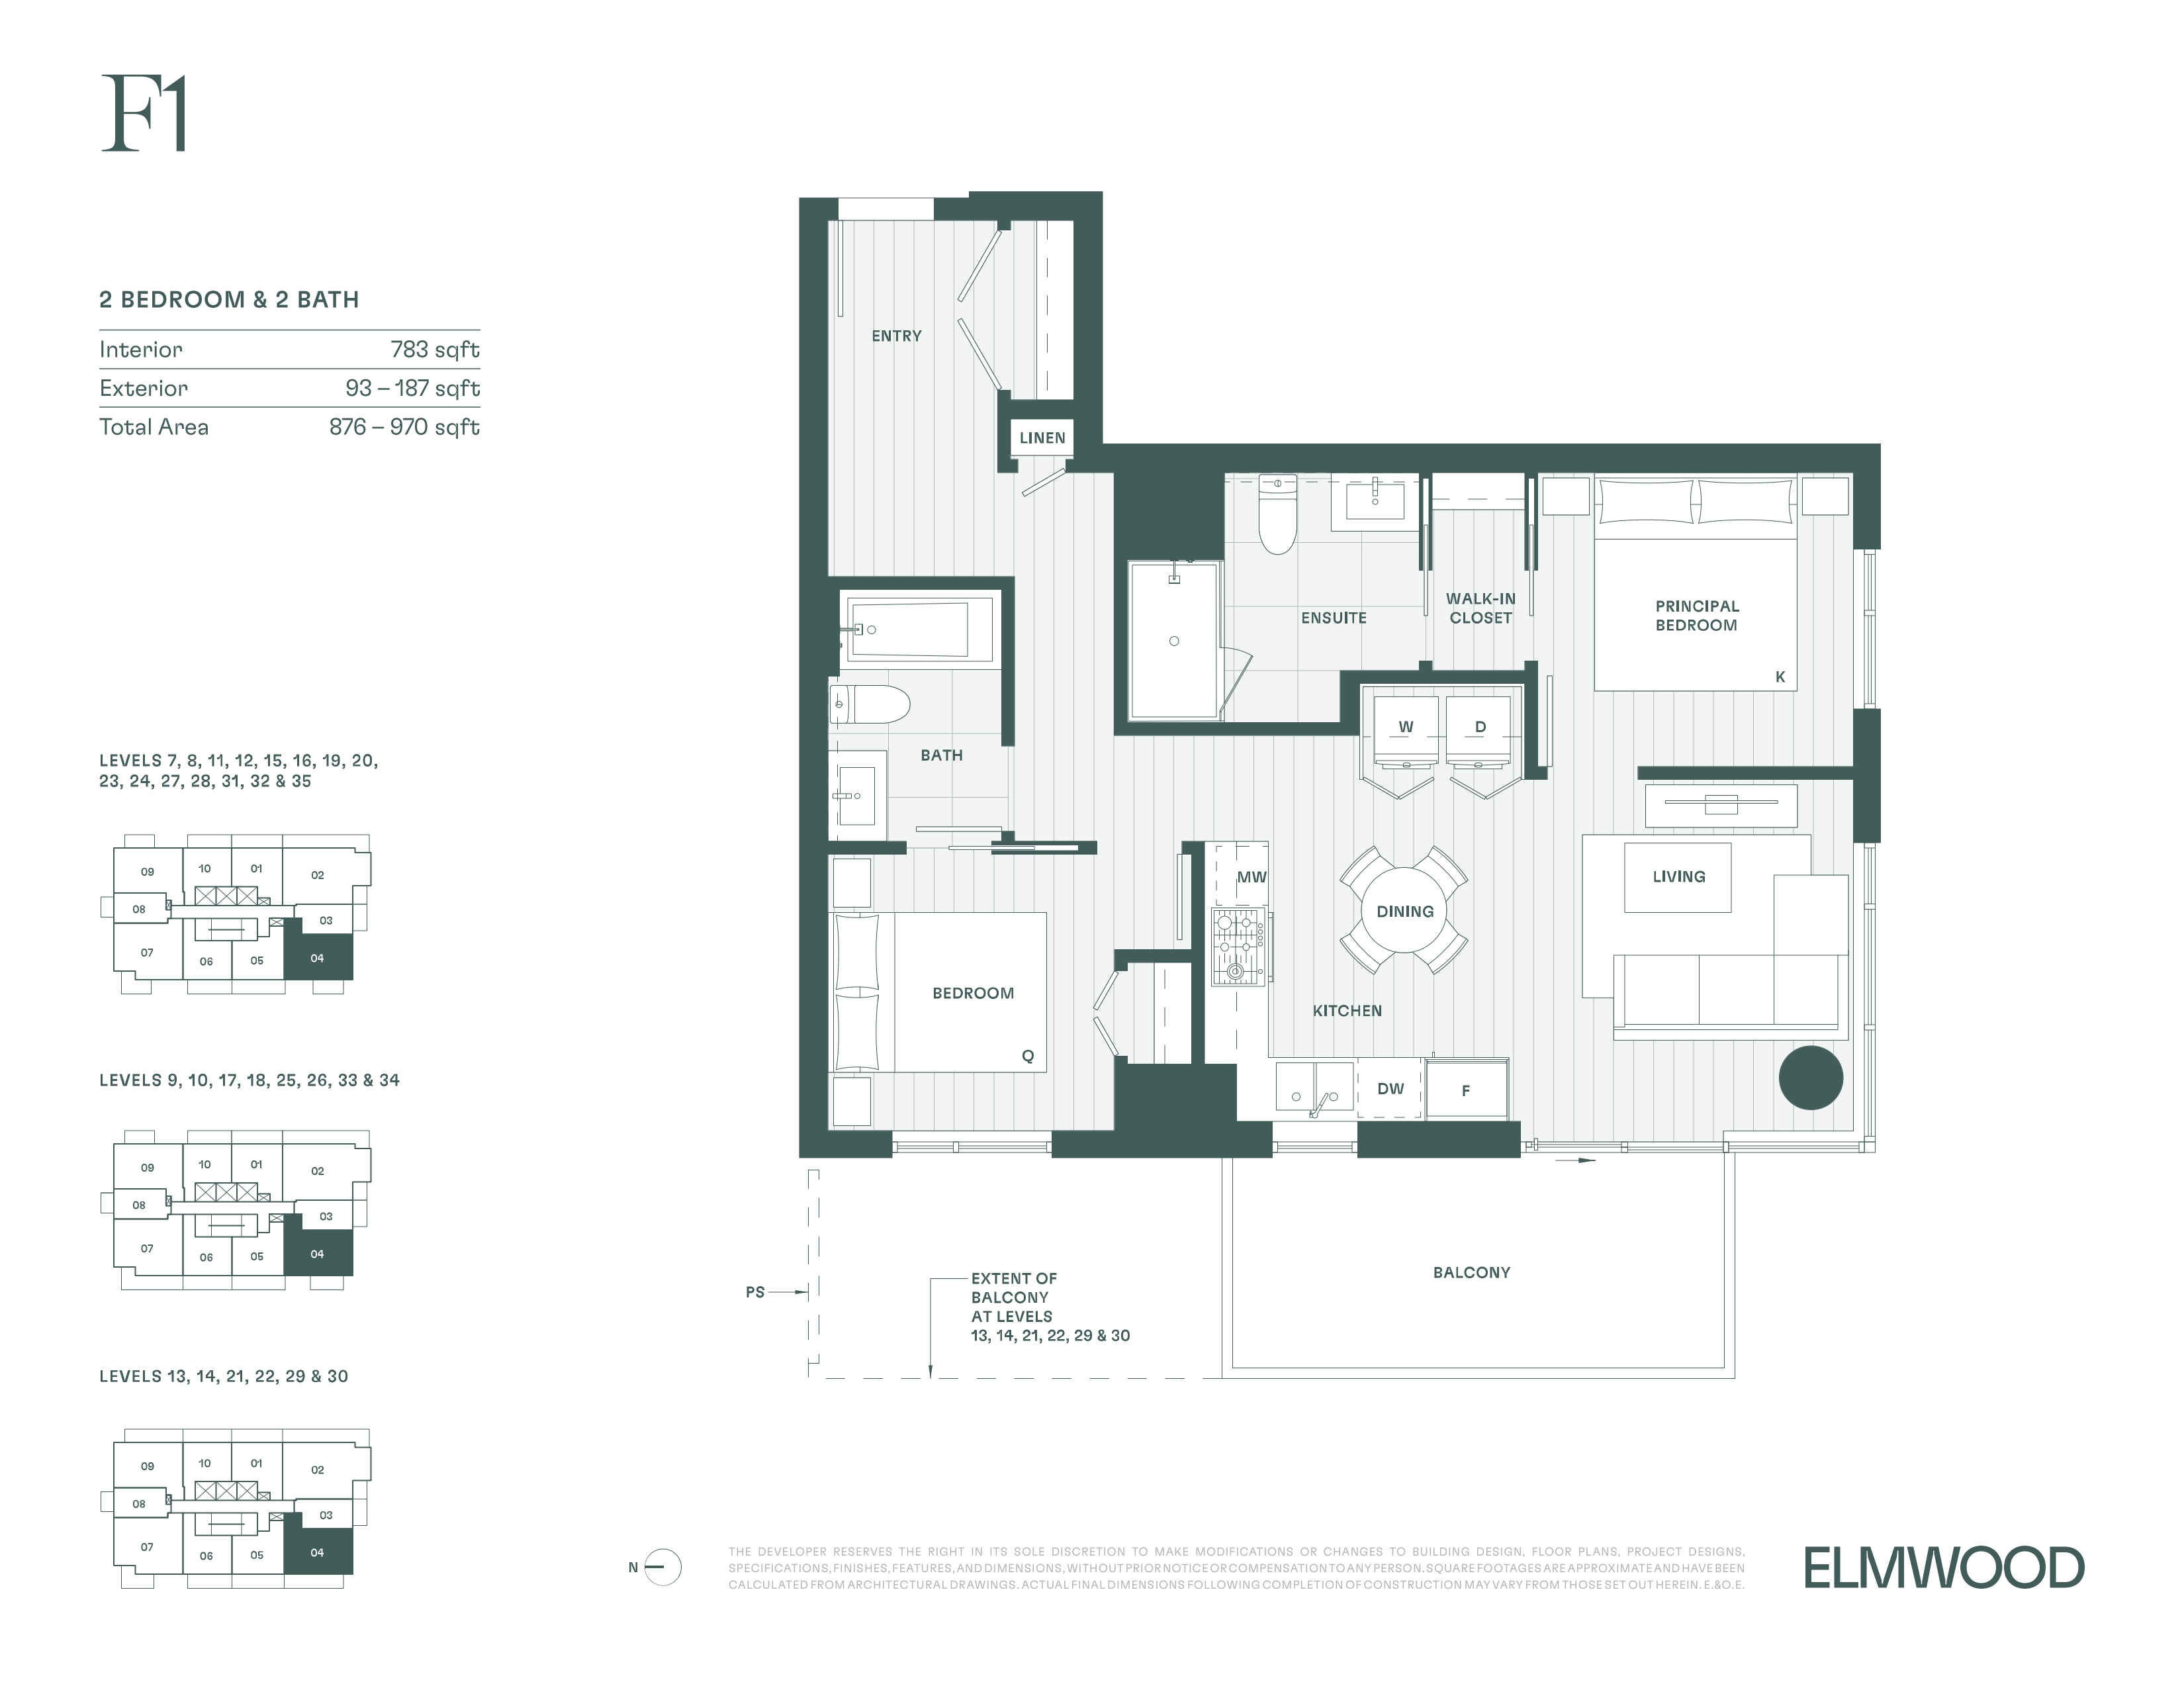  Floor Plan of Elmwood Condos with undefined beds